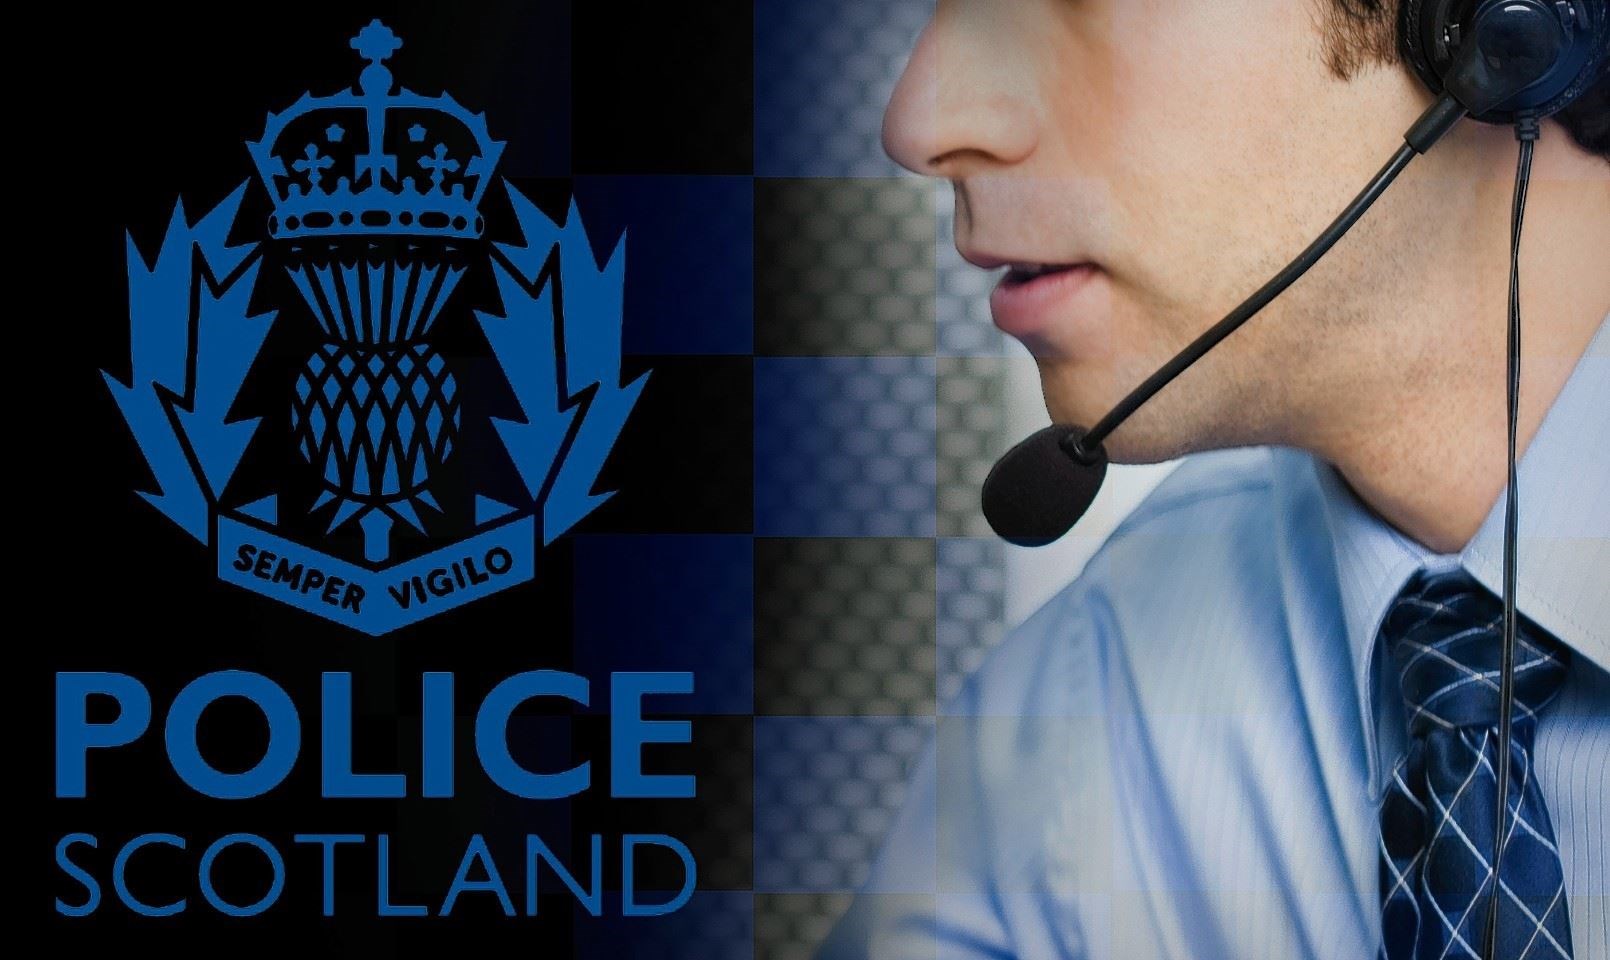 Police are appealing for information after a report of an assault in Tain.